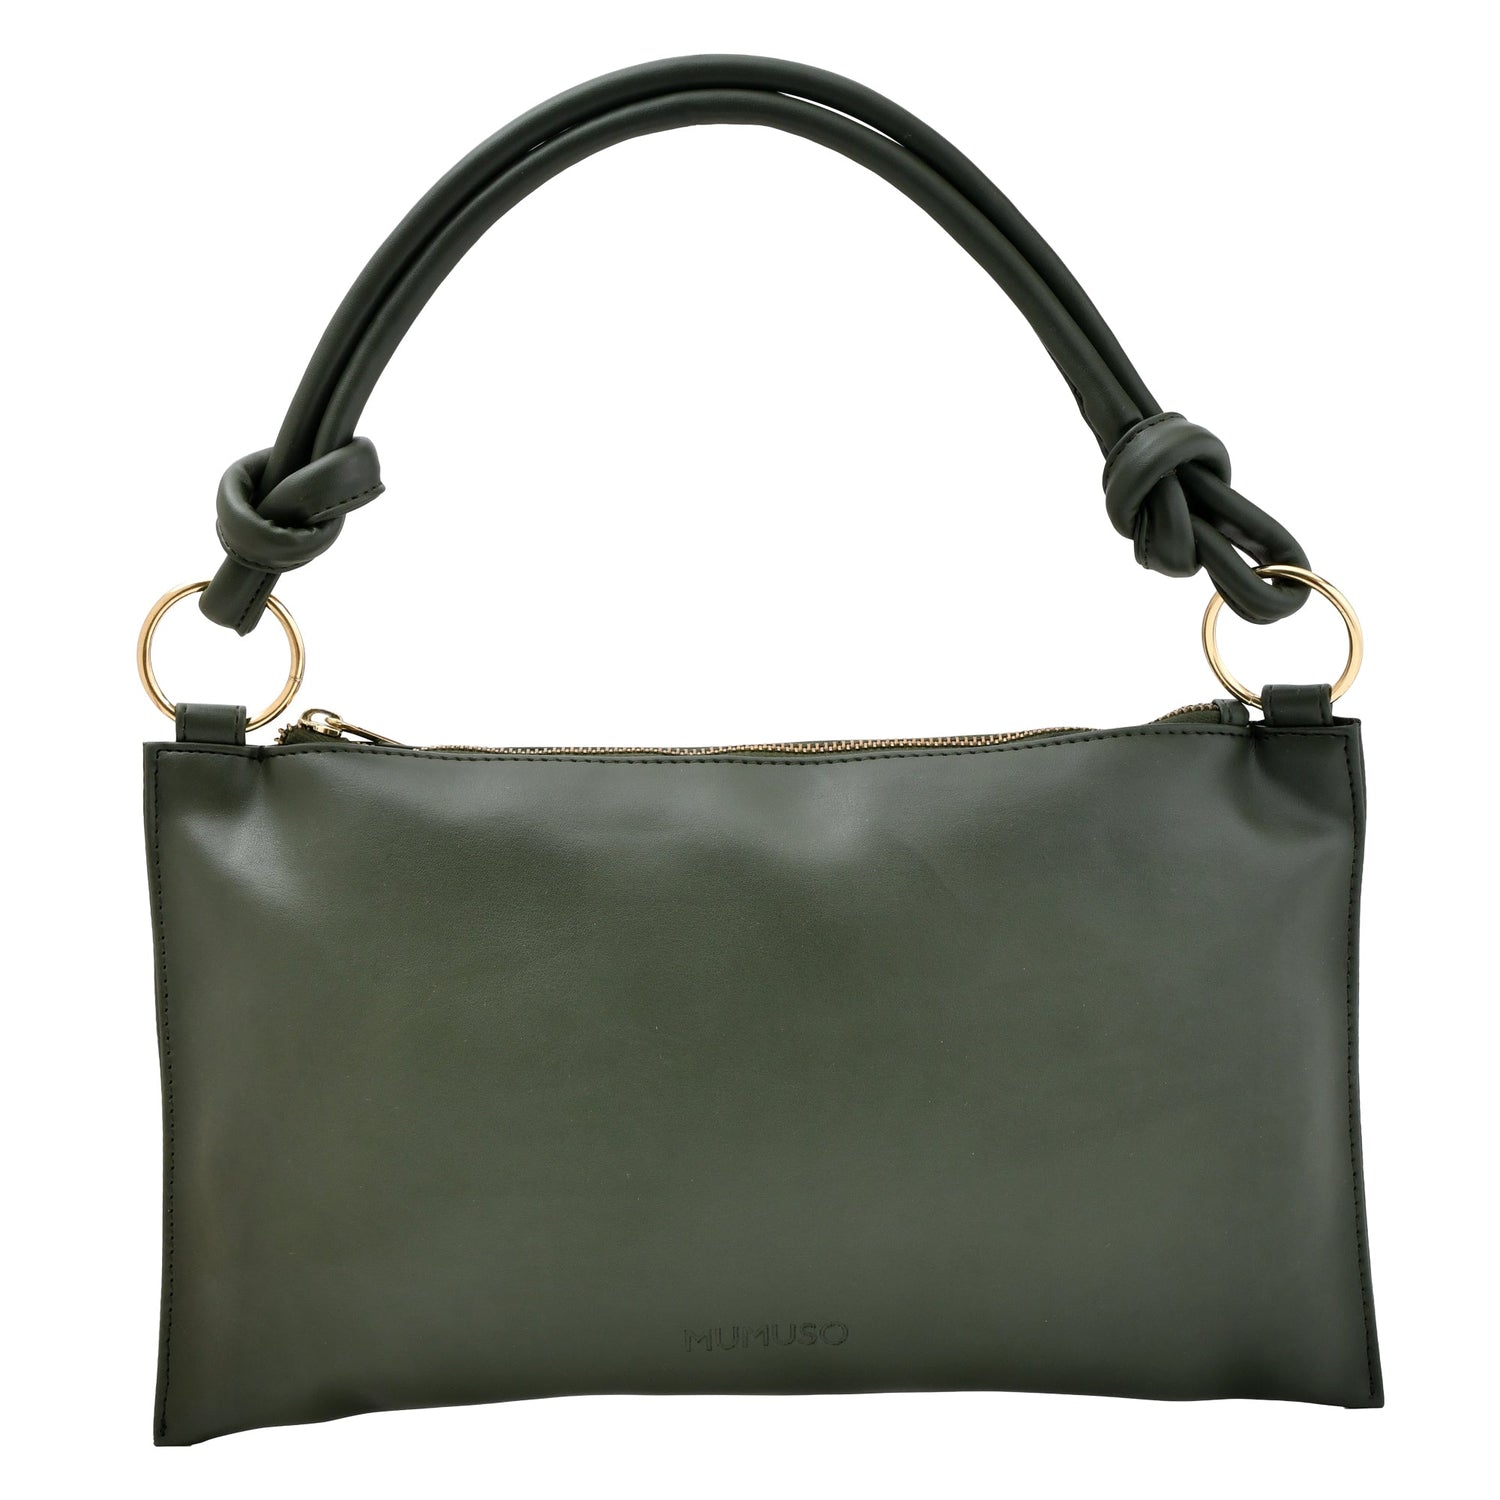 Solid Chic  Hobo Baguette - Olive Mumuso